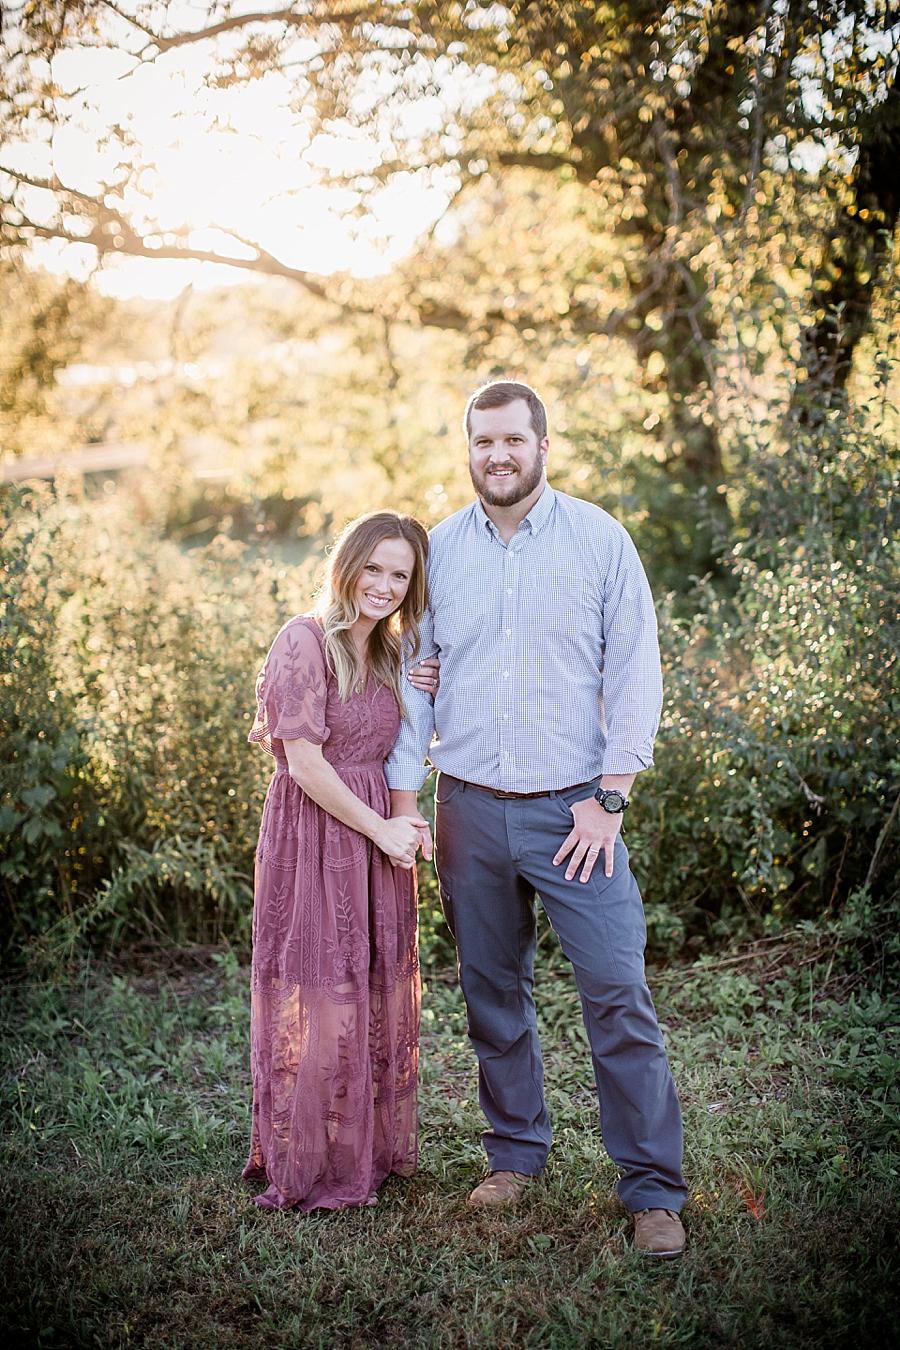 Mom and dad at this Melton Hill Park Family Session by Knoxville Wedding Photographer, Amanda May Photos.